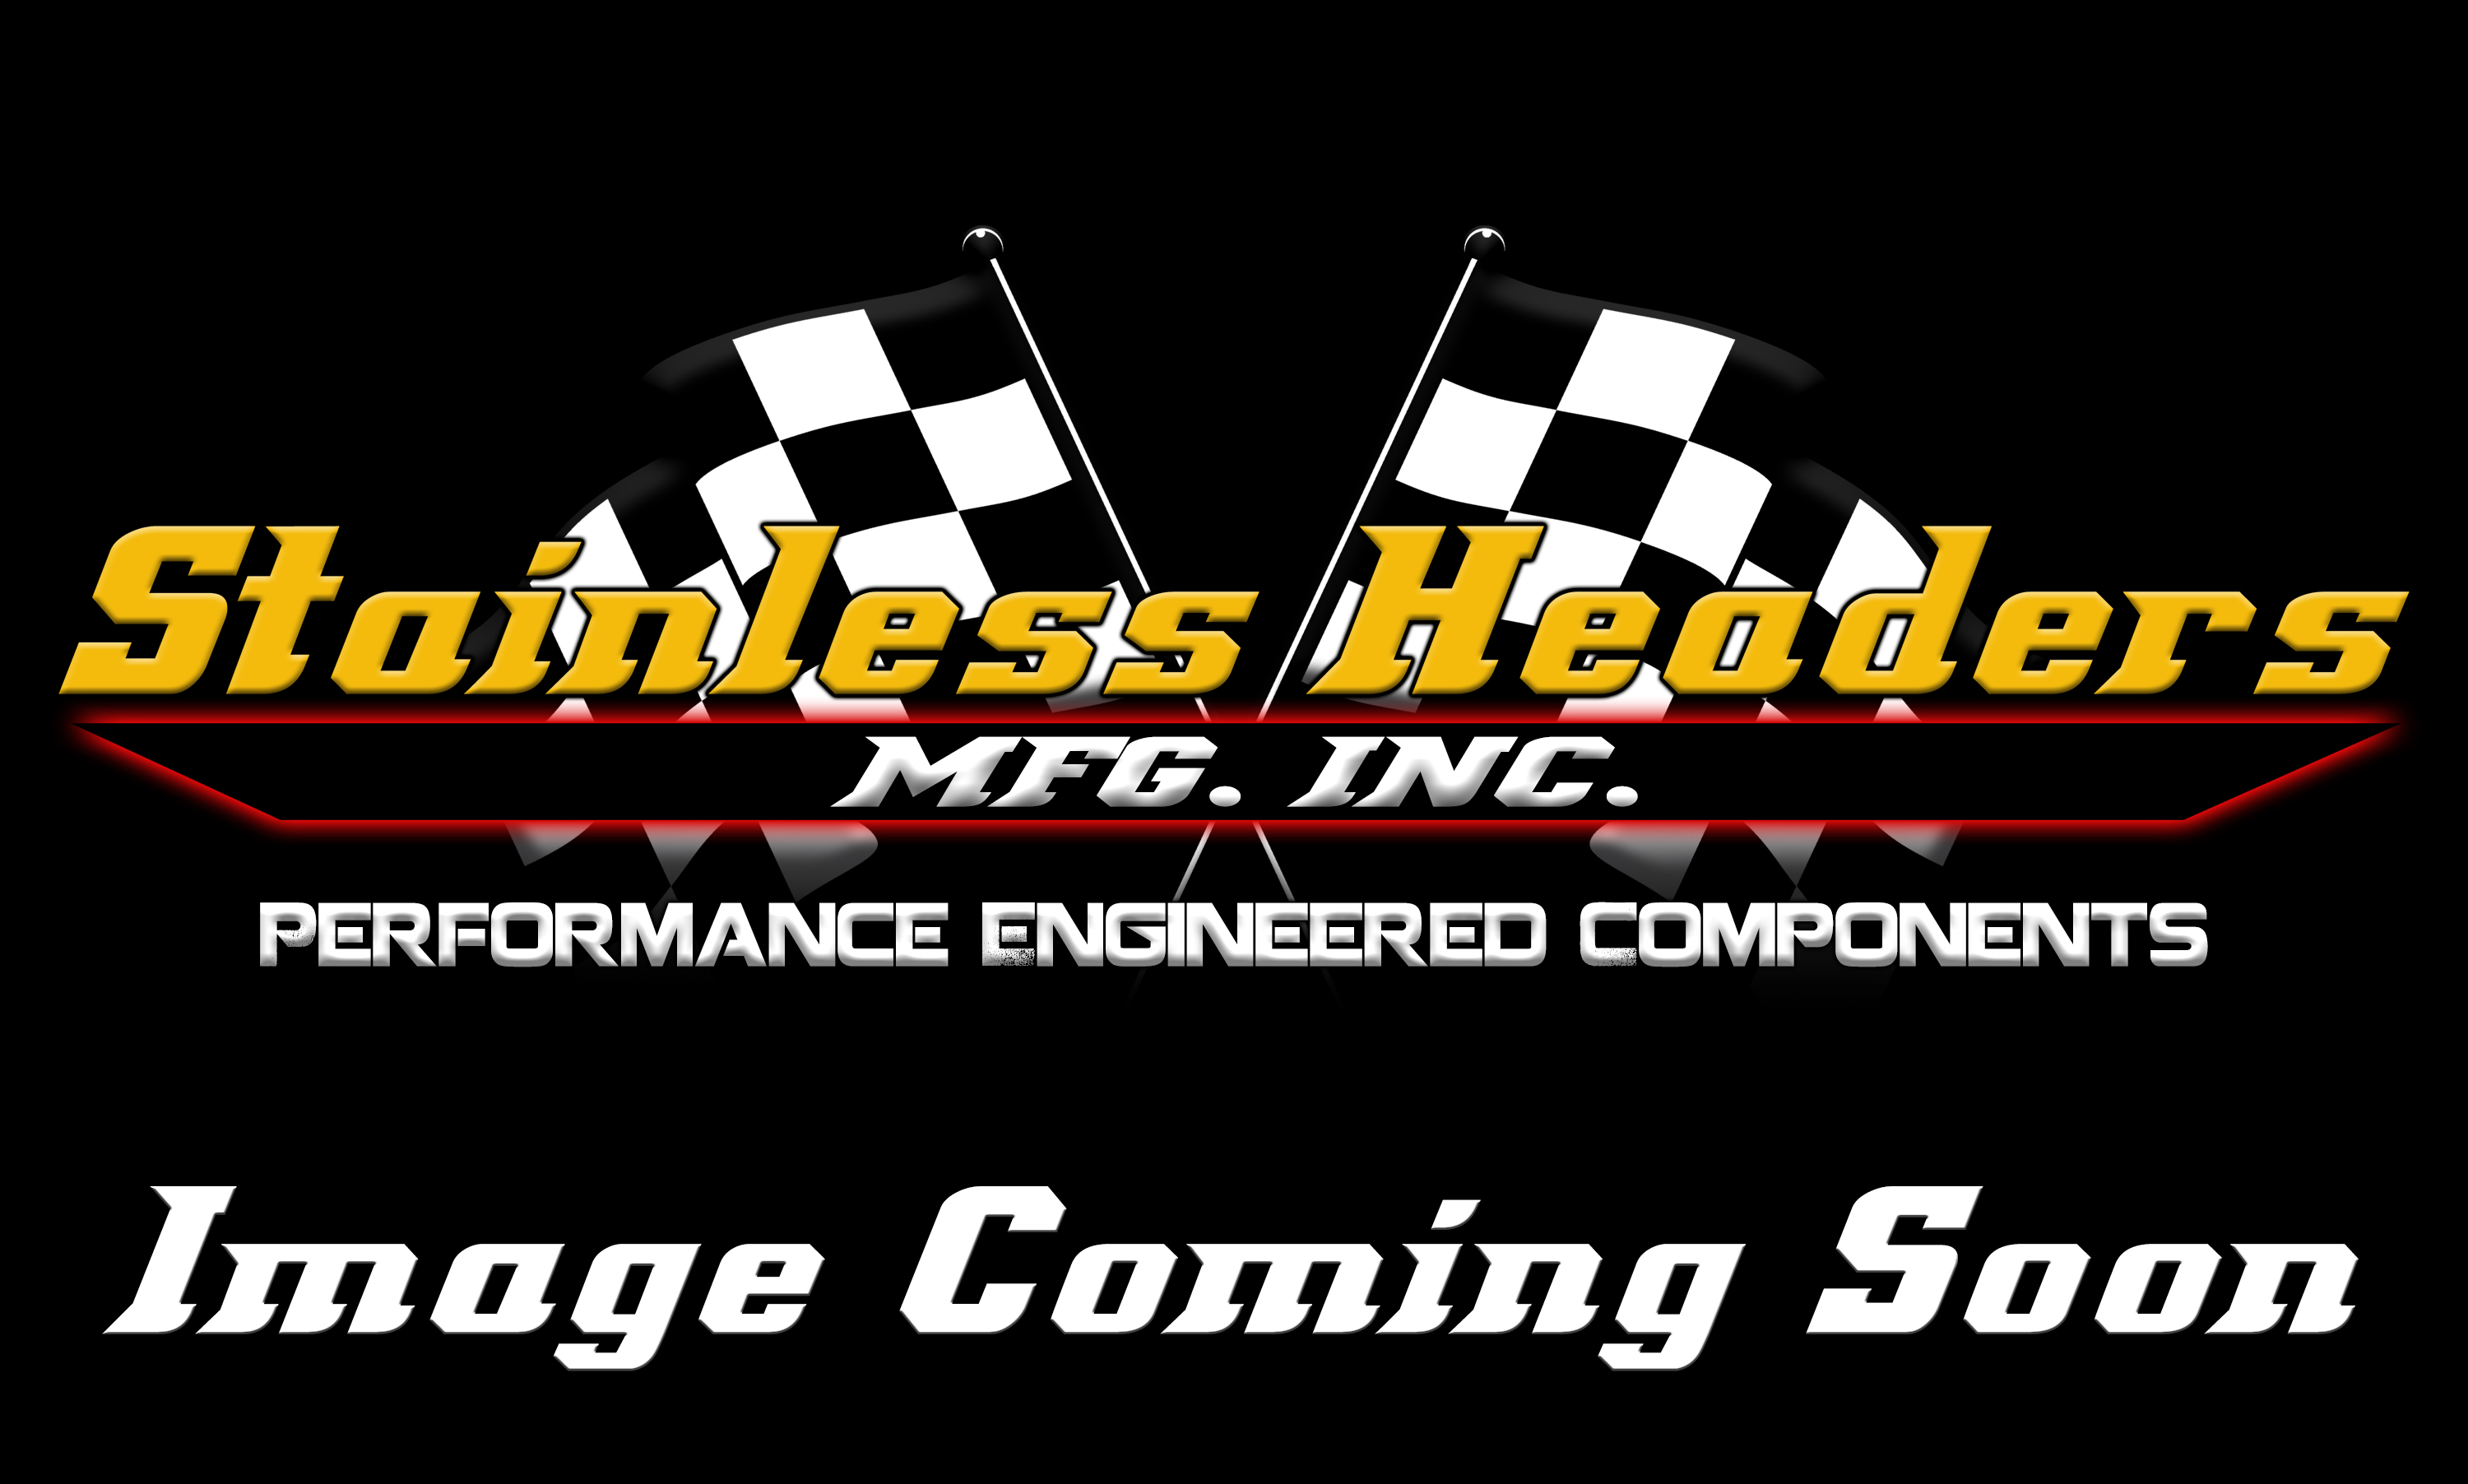 Stainless Headers - 1 3/4" Primary 4 into 1 Performance Merge Collector-16ga 321ss - Image 1